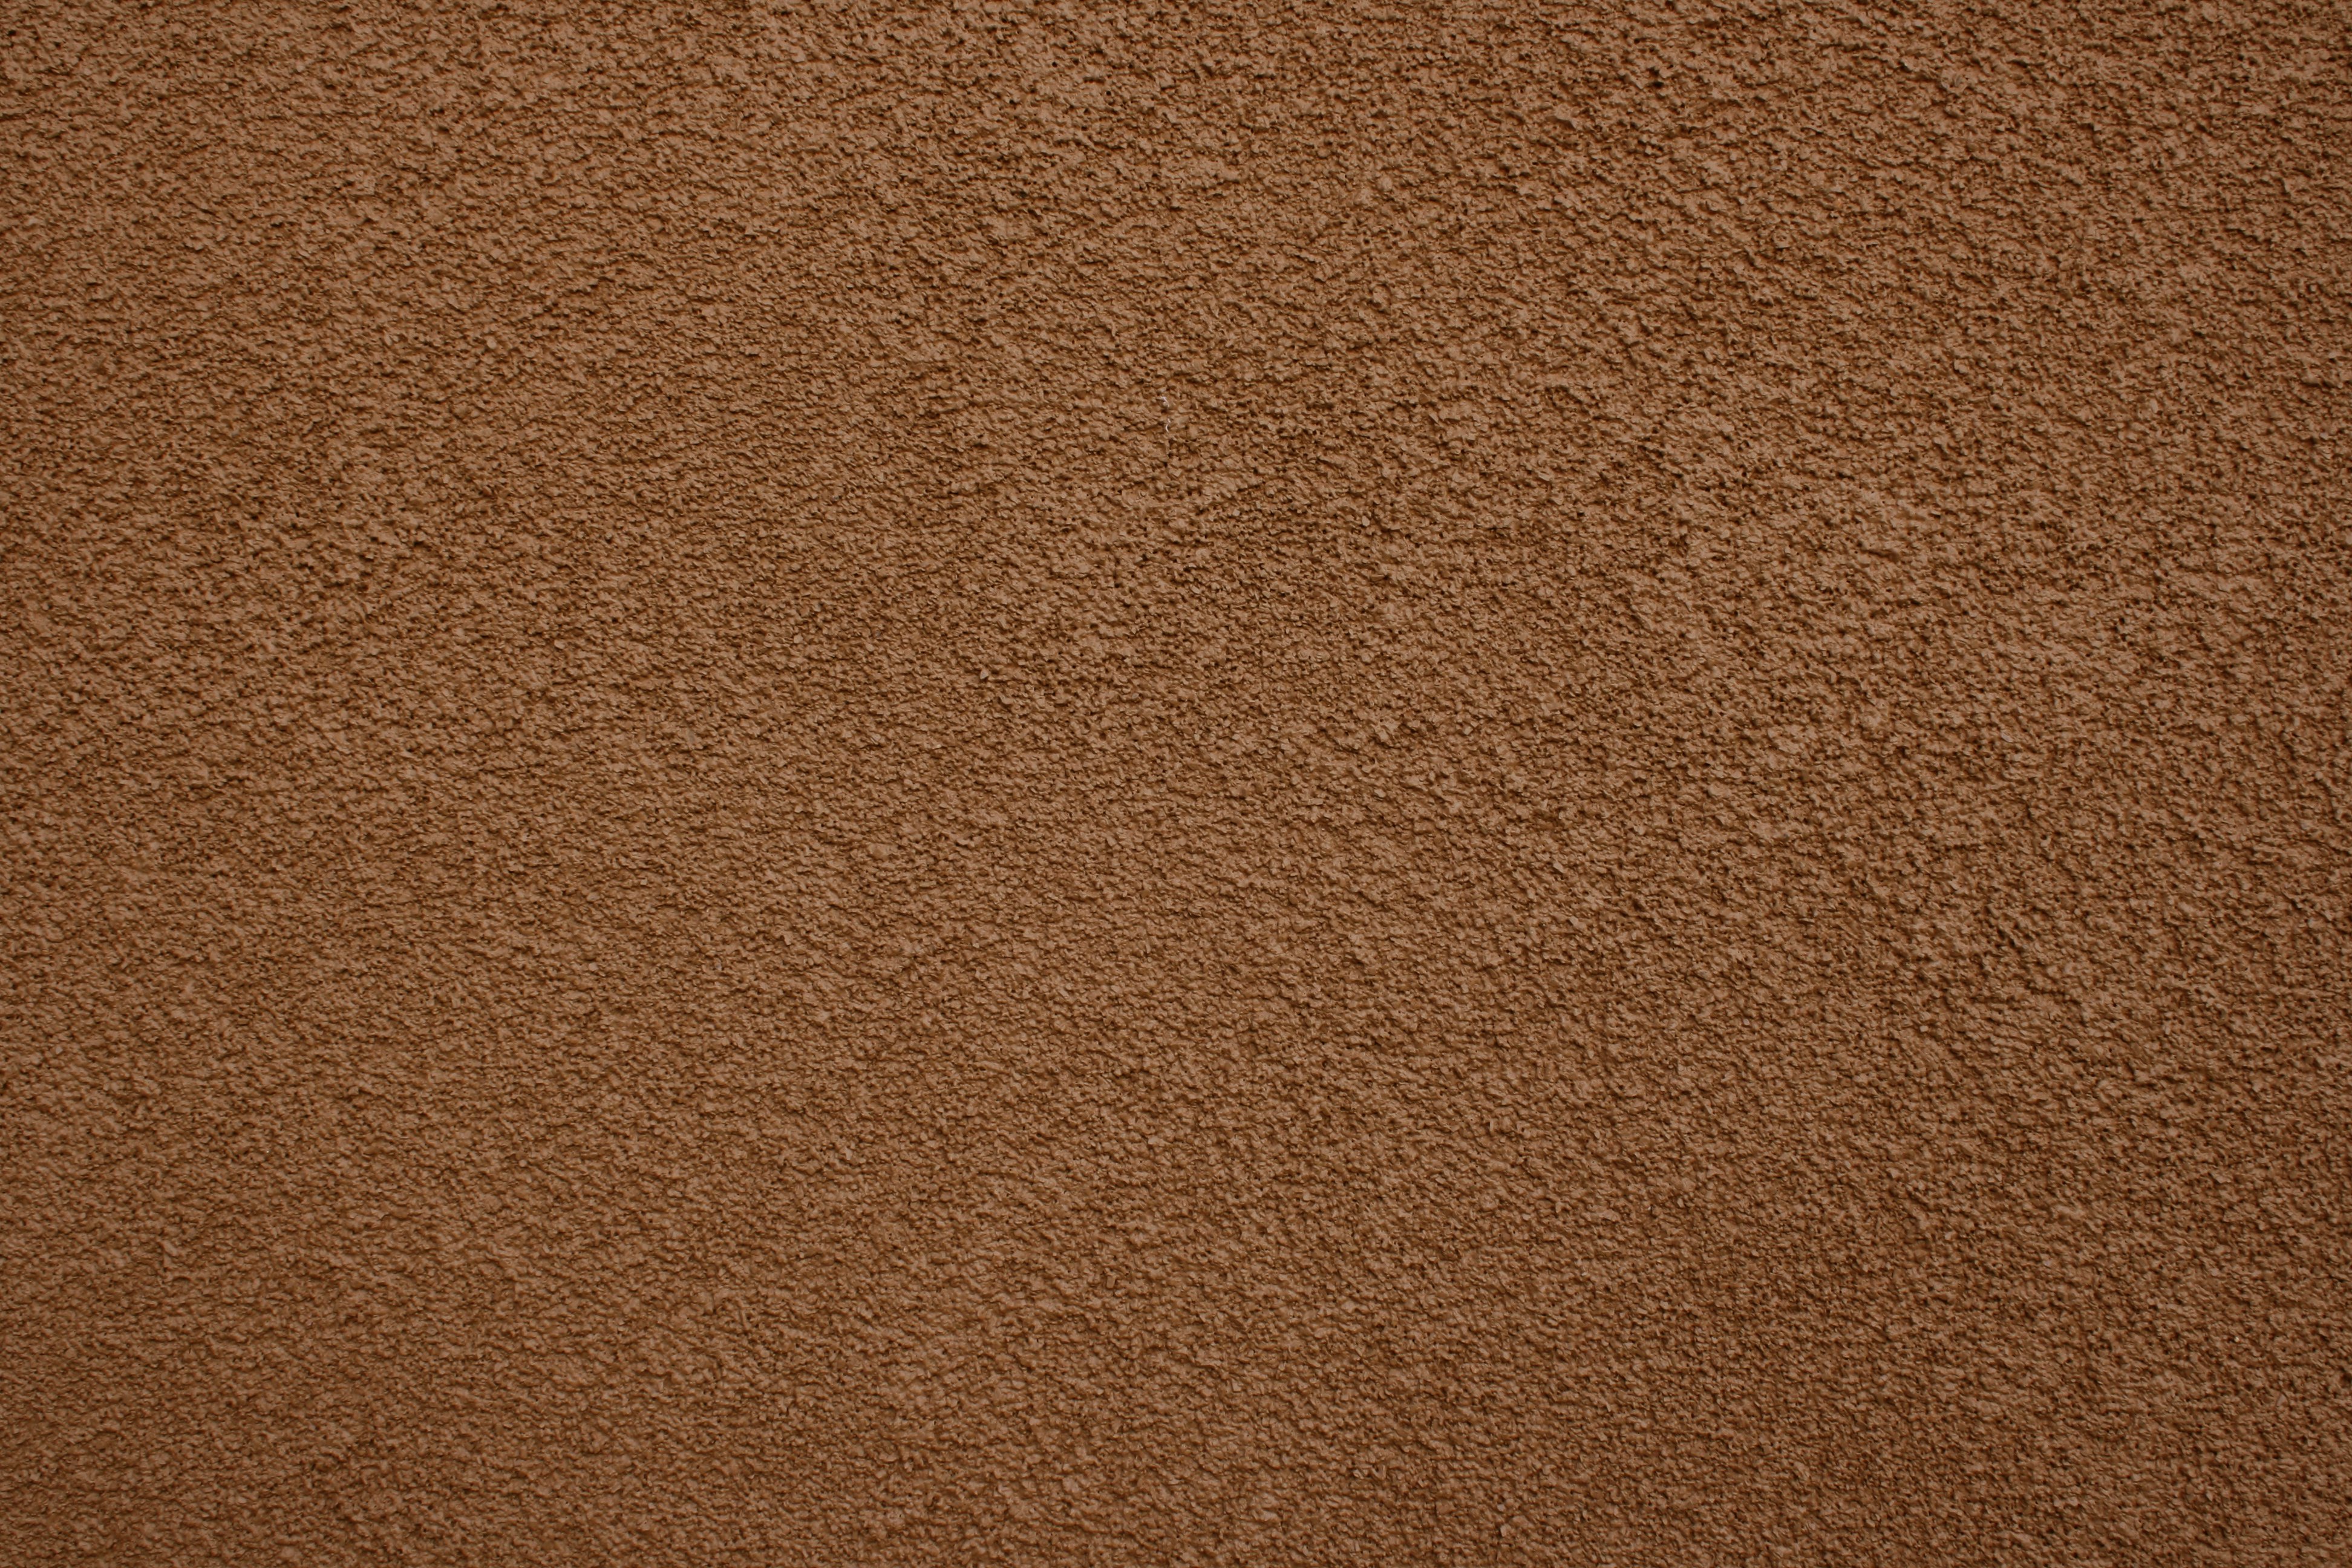 Brown Stucco Wall Texture Picture | Free Photograph | Photos Public ...